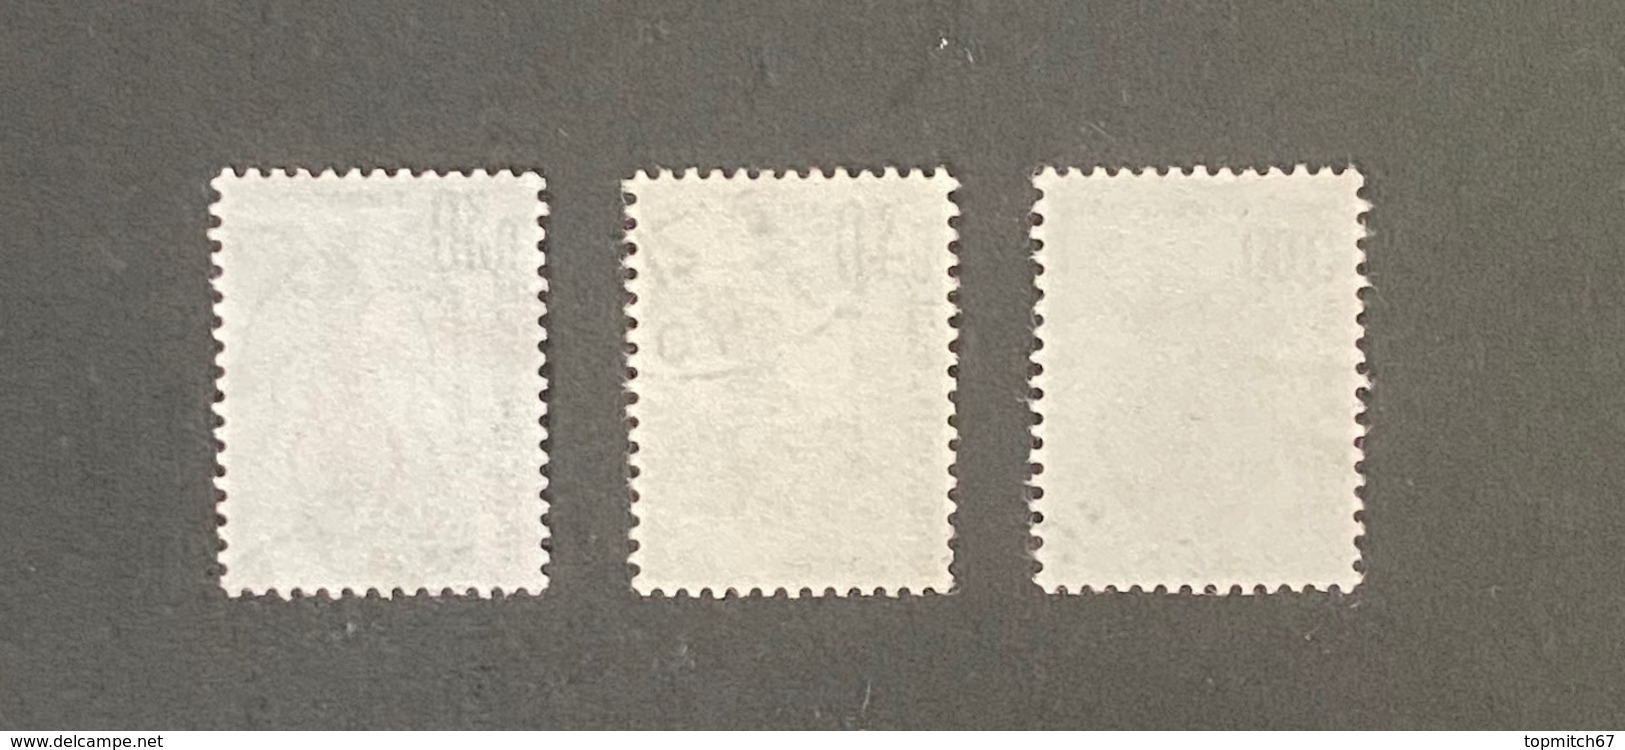 FRAYX109-11U - Timbres Taxe Insectes Coléoptères (I) Set Of 3 Used Stamps 1983 - France YT YX 109-11 - Zegels